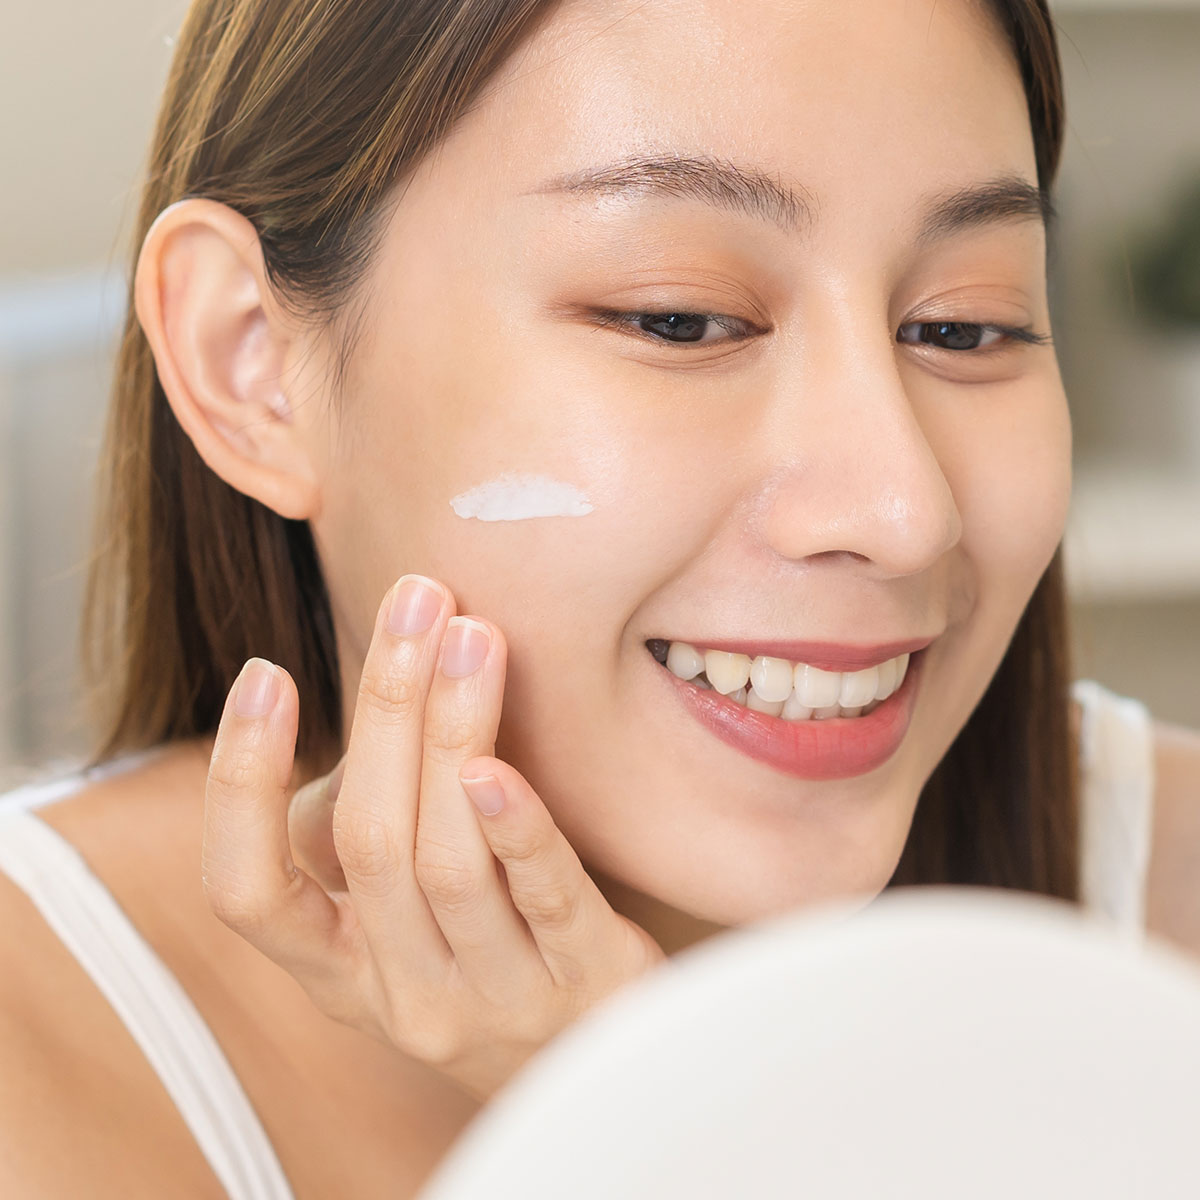 young woman applying white facial moisturizer sunscreen primer product in front of mirror